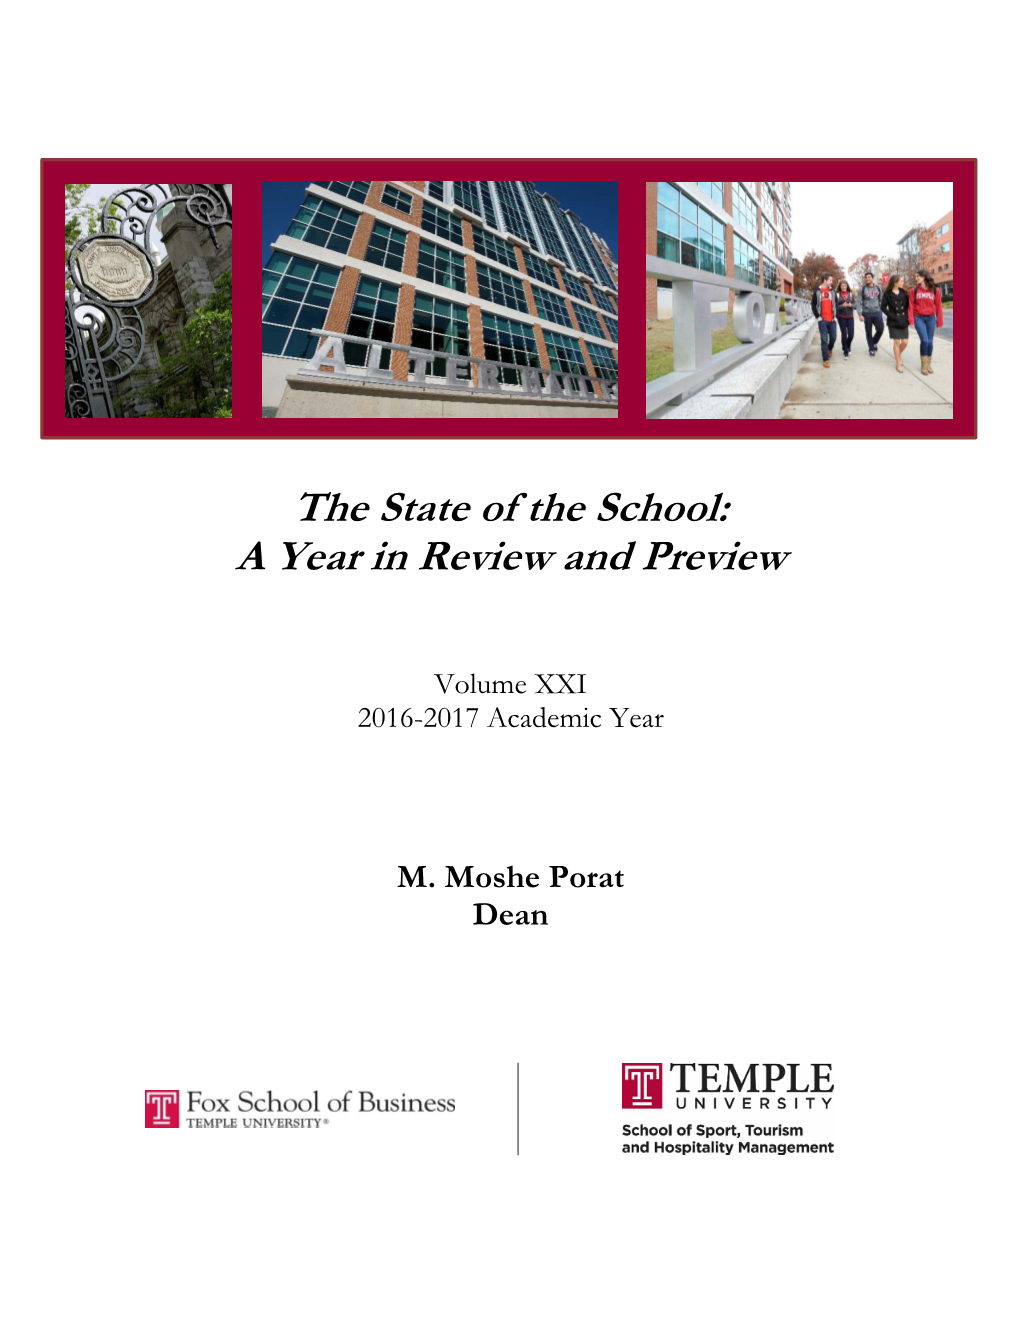 The State of the School: a Year in Review and Preview